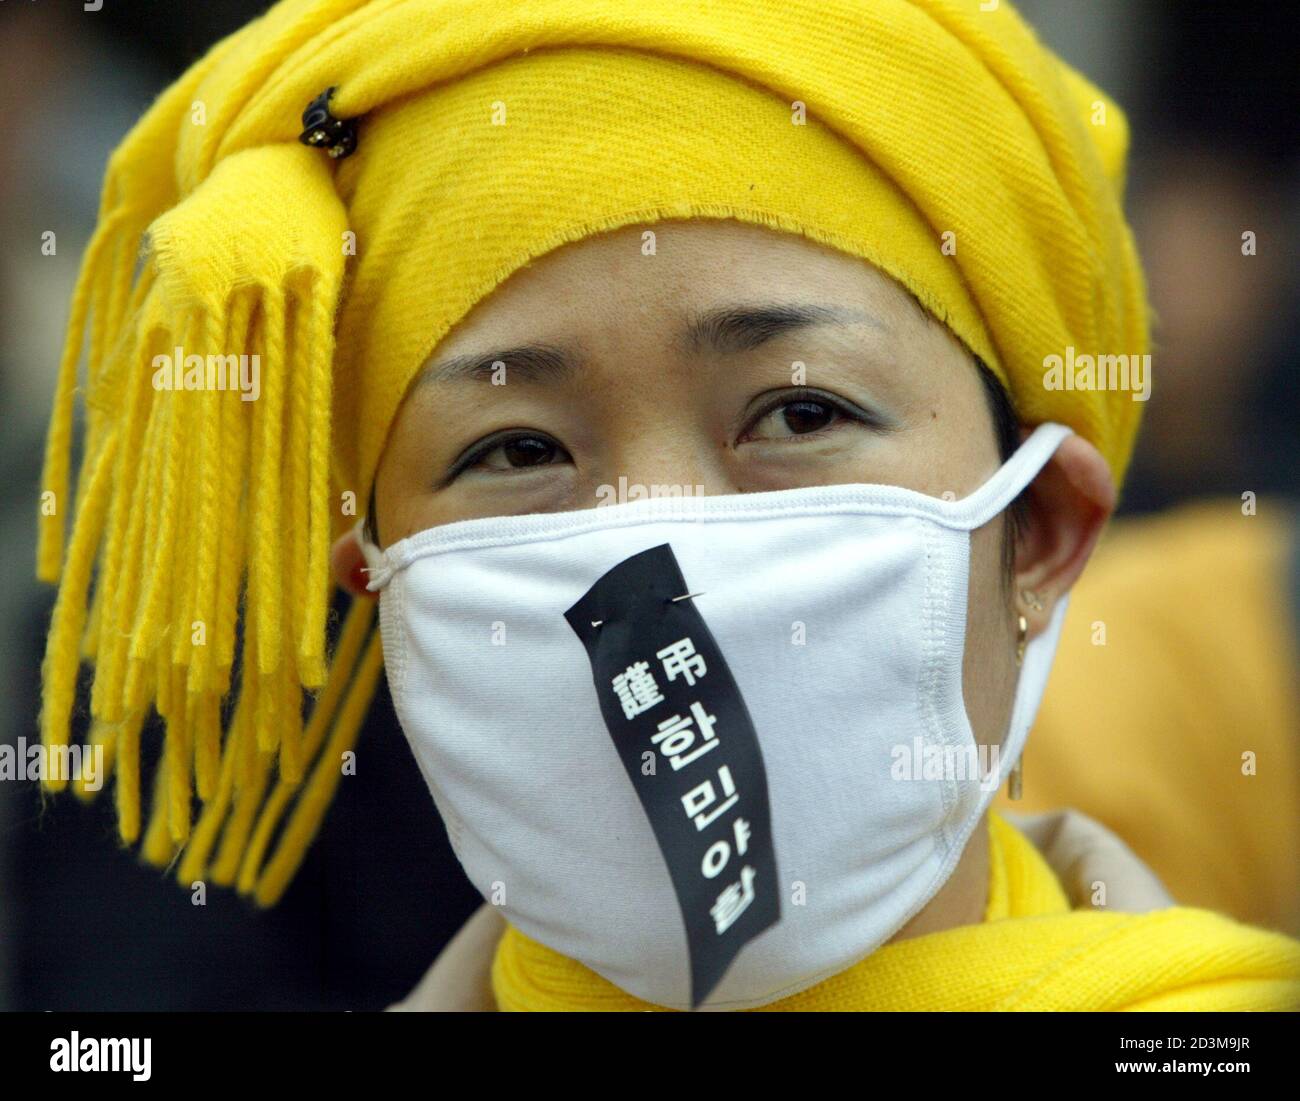 A South Korean protester wears a mask pinned with a funeral ribbon symbolising a criticism of the two opposition parties during a pro-president rally near parliament in Seoul March 10, 2004. South Korea's main opposition parties prolonged the political agony on Wednesday by putting off an unprecedented attempt to impeach President Roh for at least another day. The funeral ribbon reads:' Offering our condolence to an unprincipled coalition between the Grand National Party and the Millennium Democratic Party'. REUTERS/Lee Jae-Won  LJW/FA Stock Photo